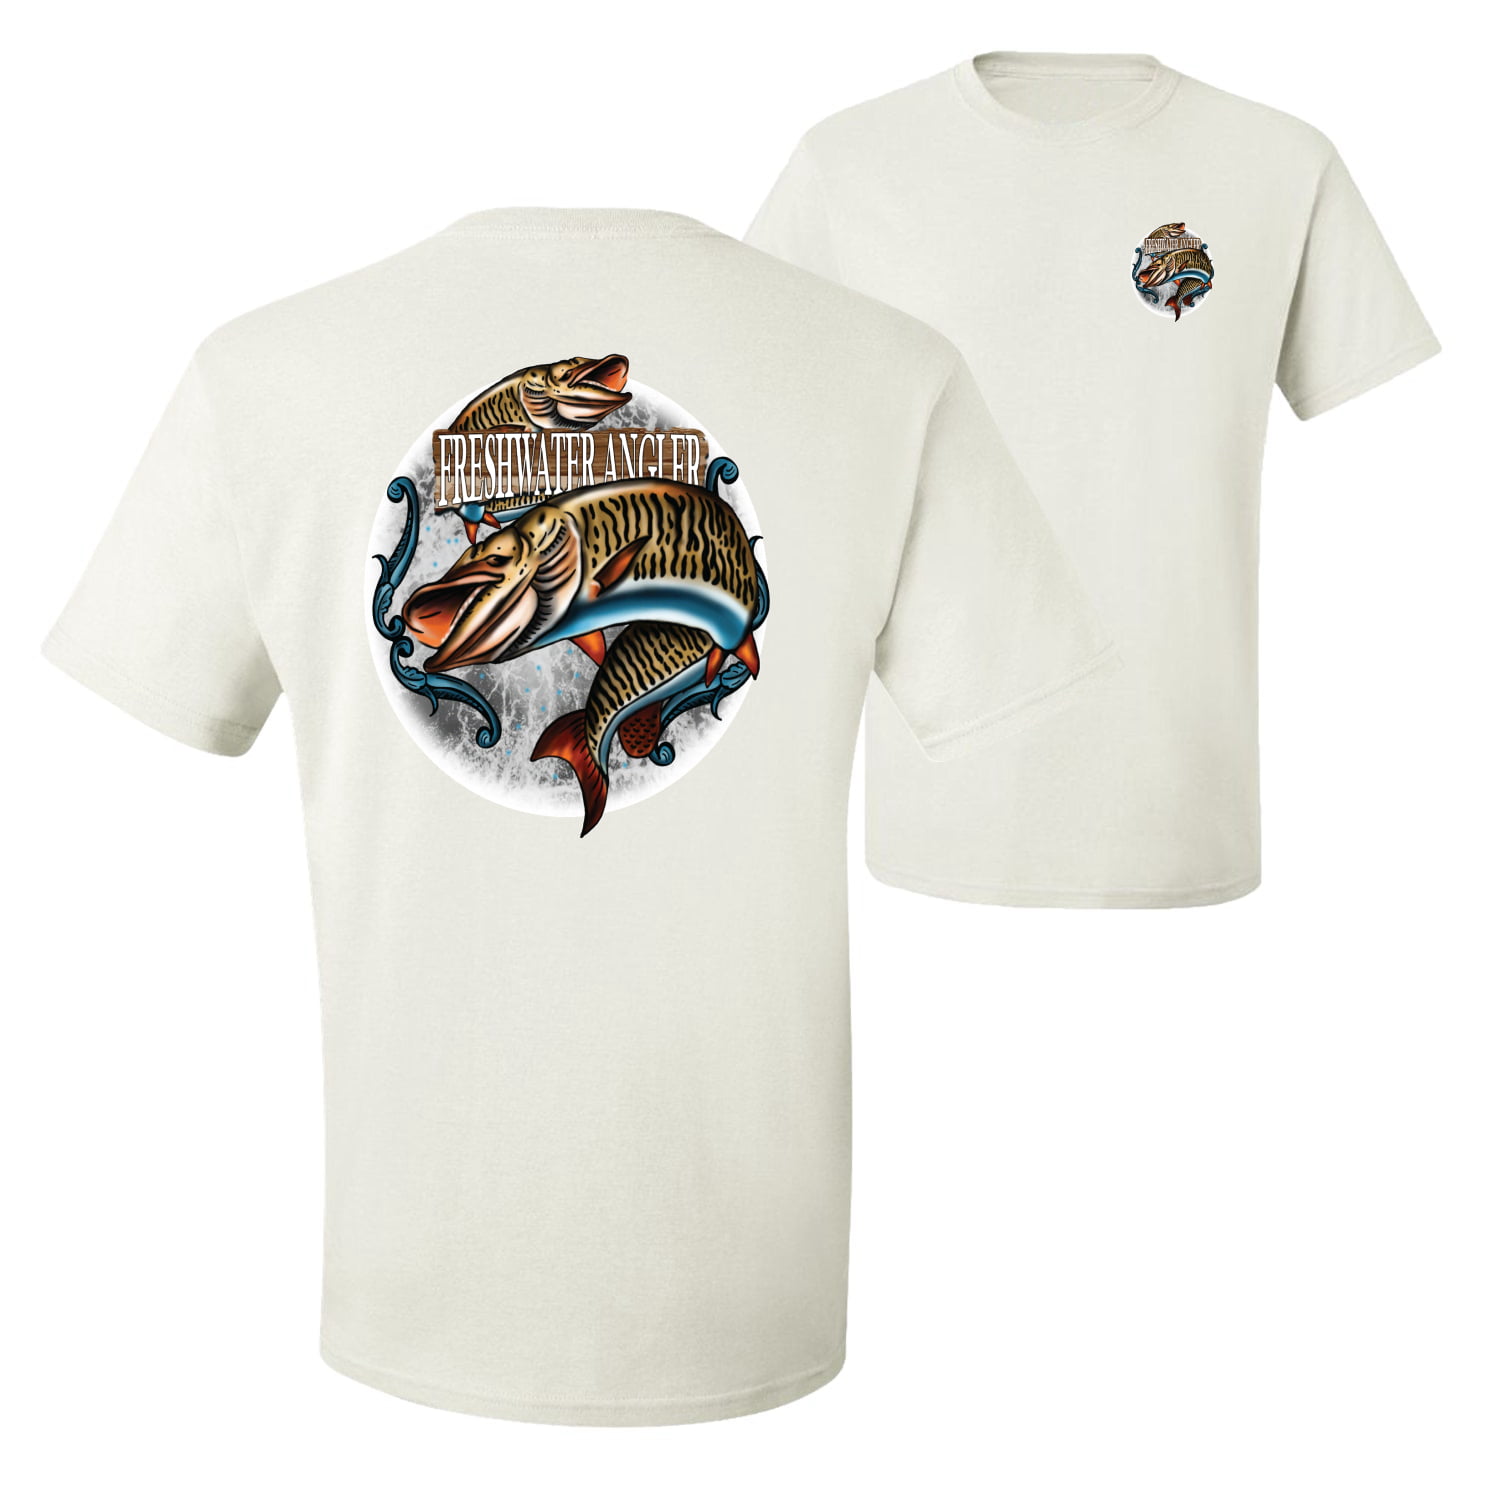 Wild Bobby,Freshwater Angler Fishing Front and Back Men's Graphic T-Shirt,  White, 5XL